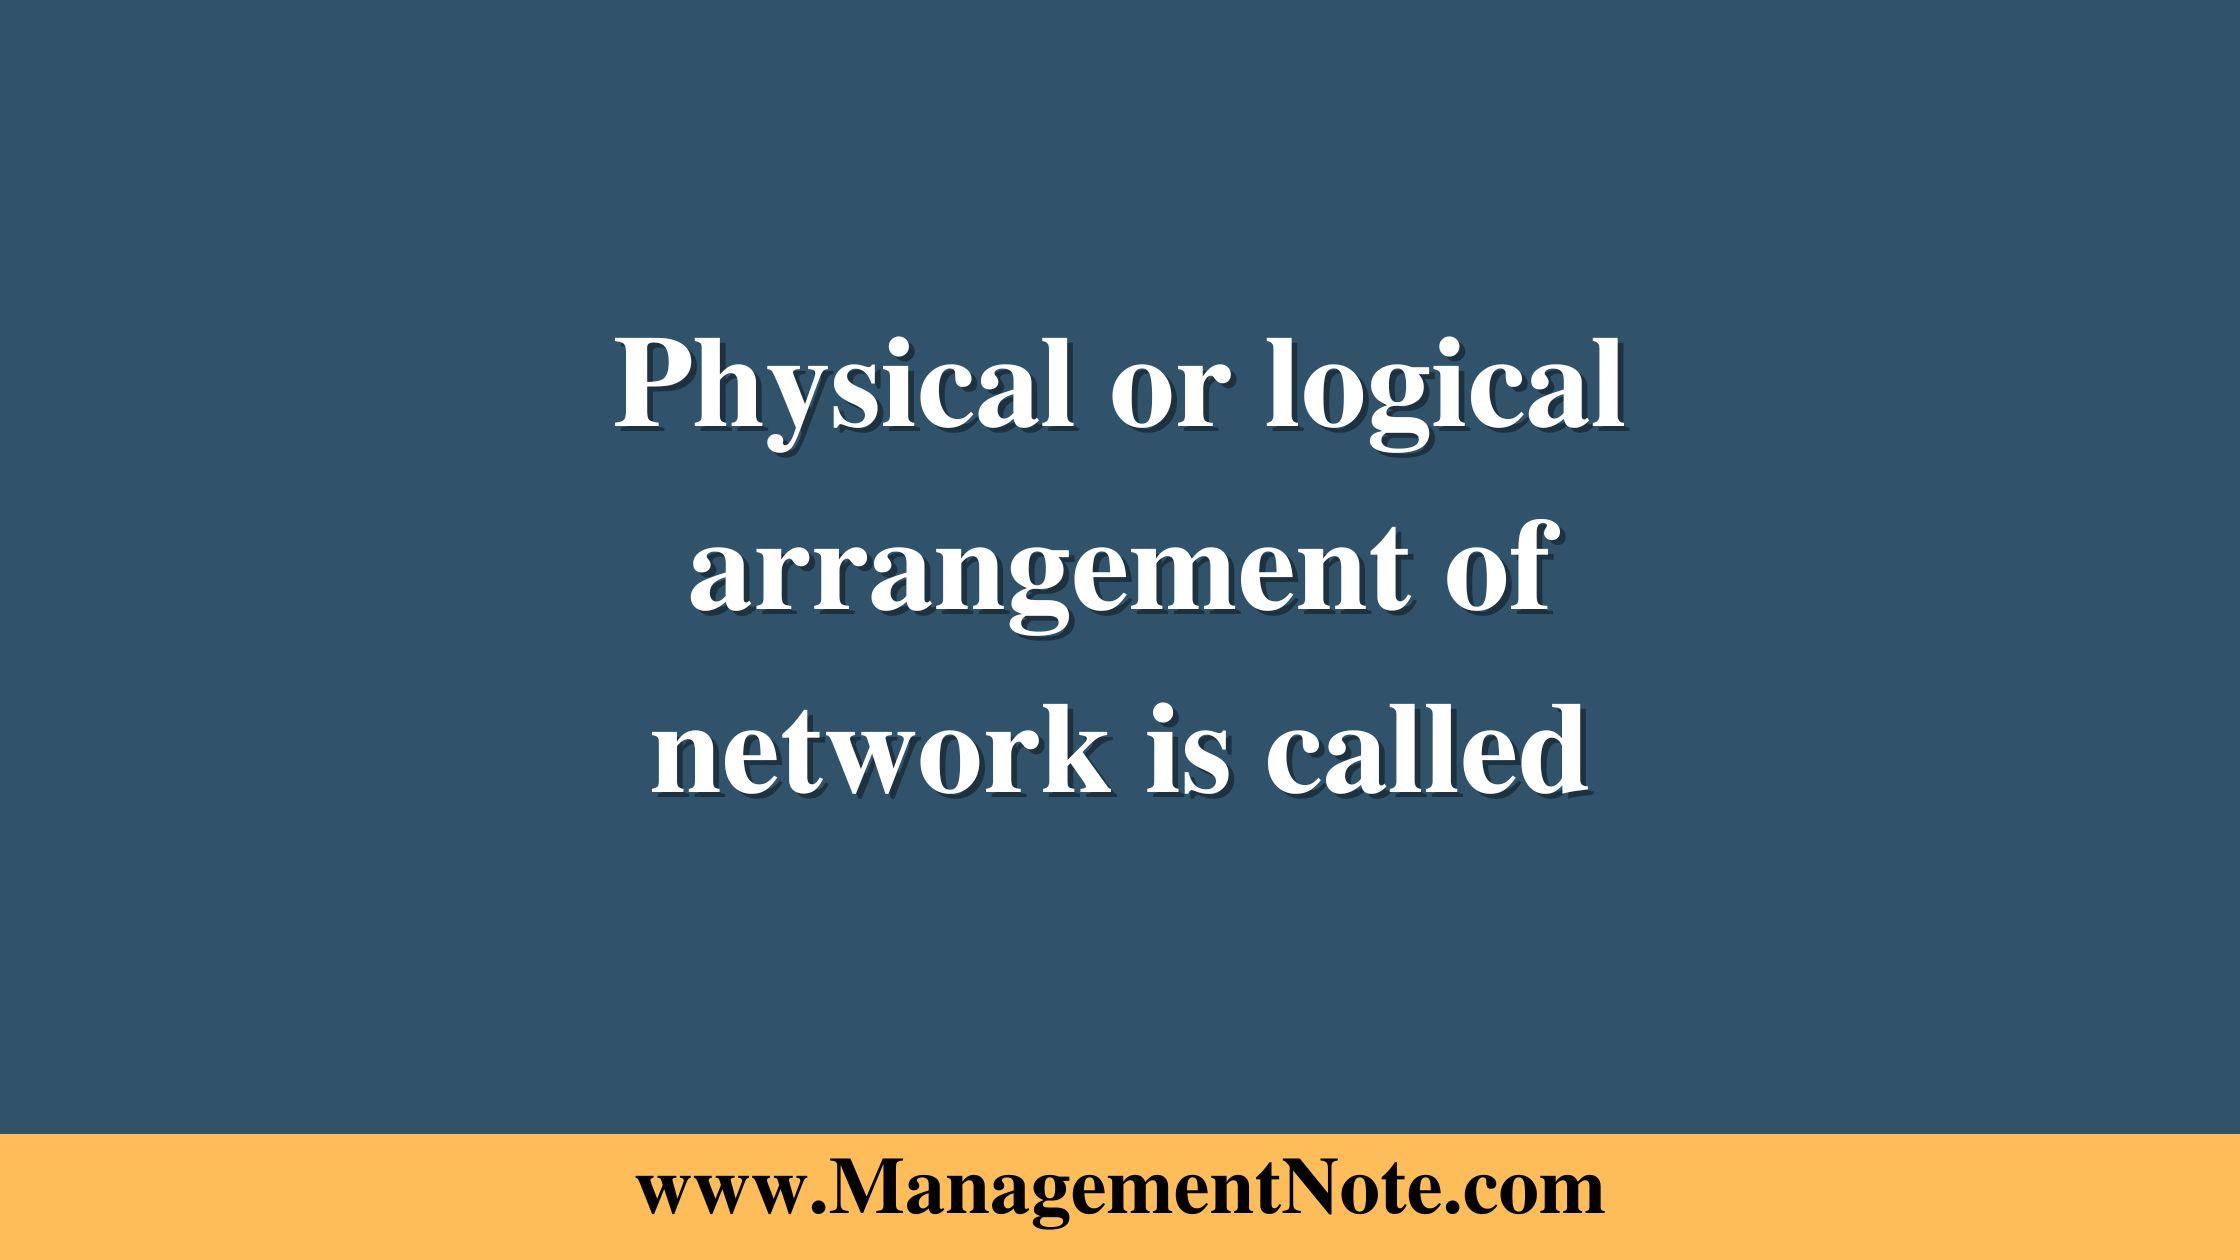 Physical or logical arrangement of network is called